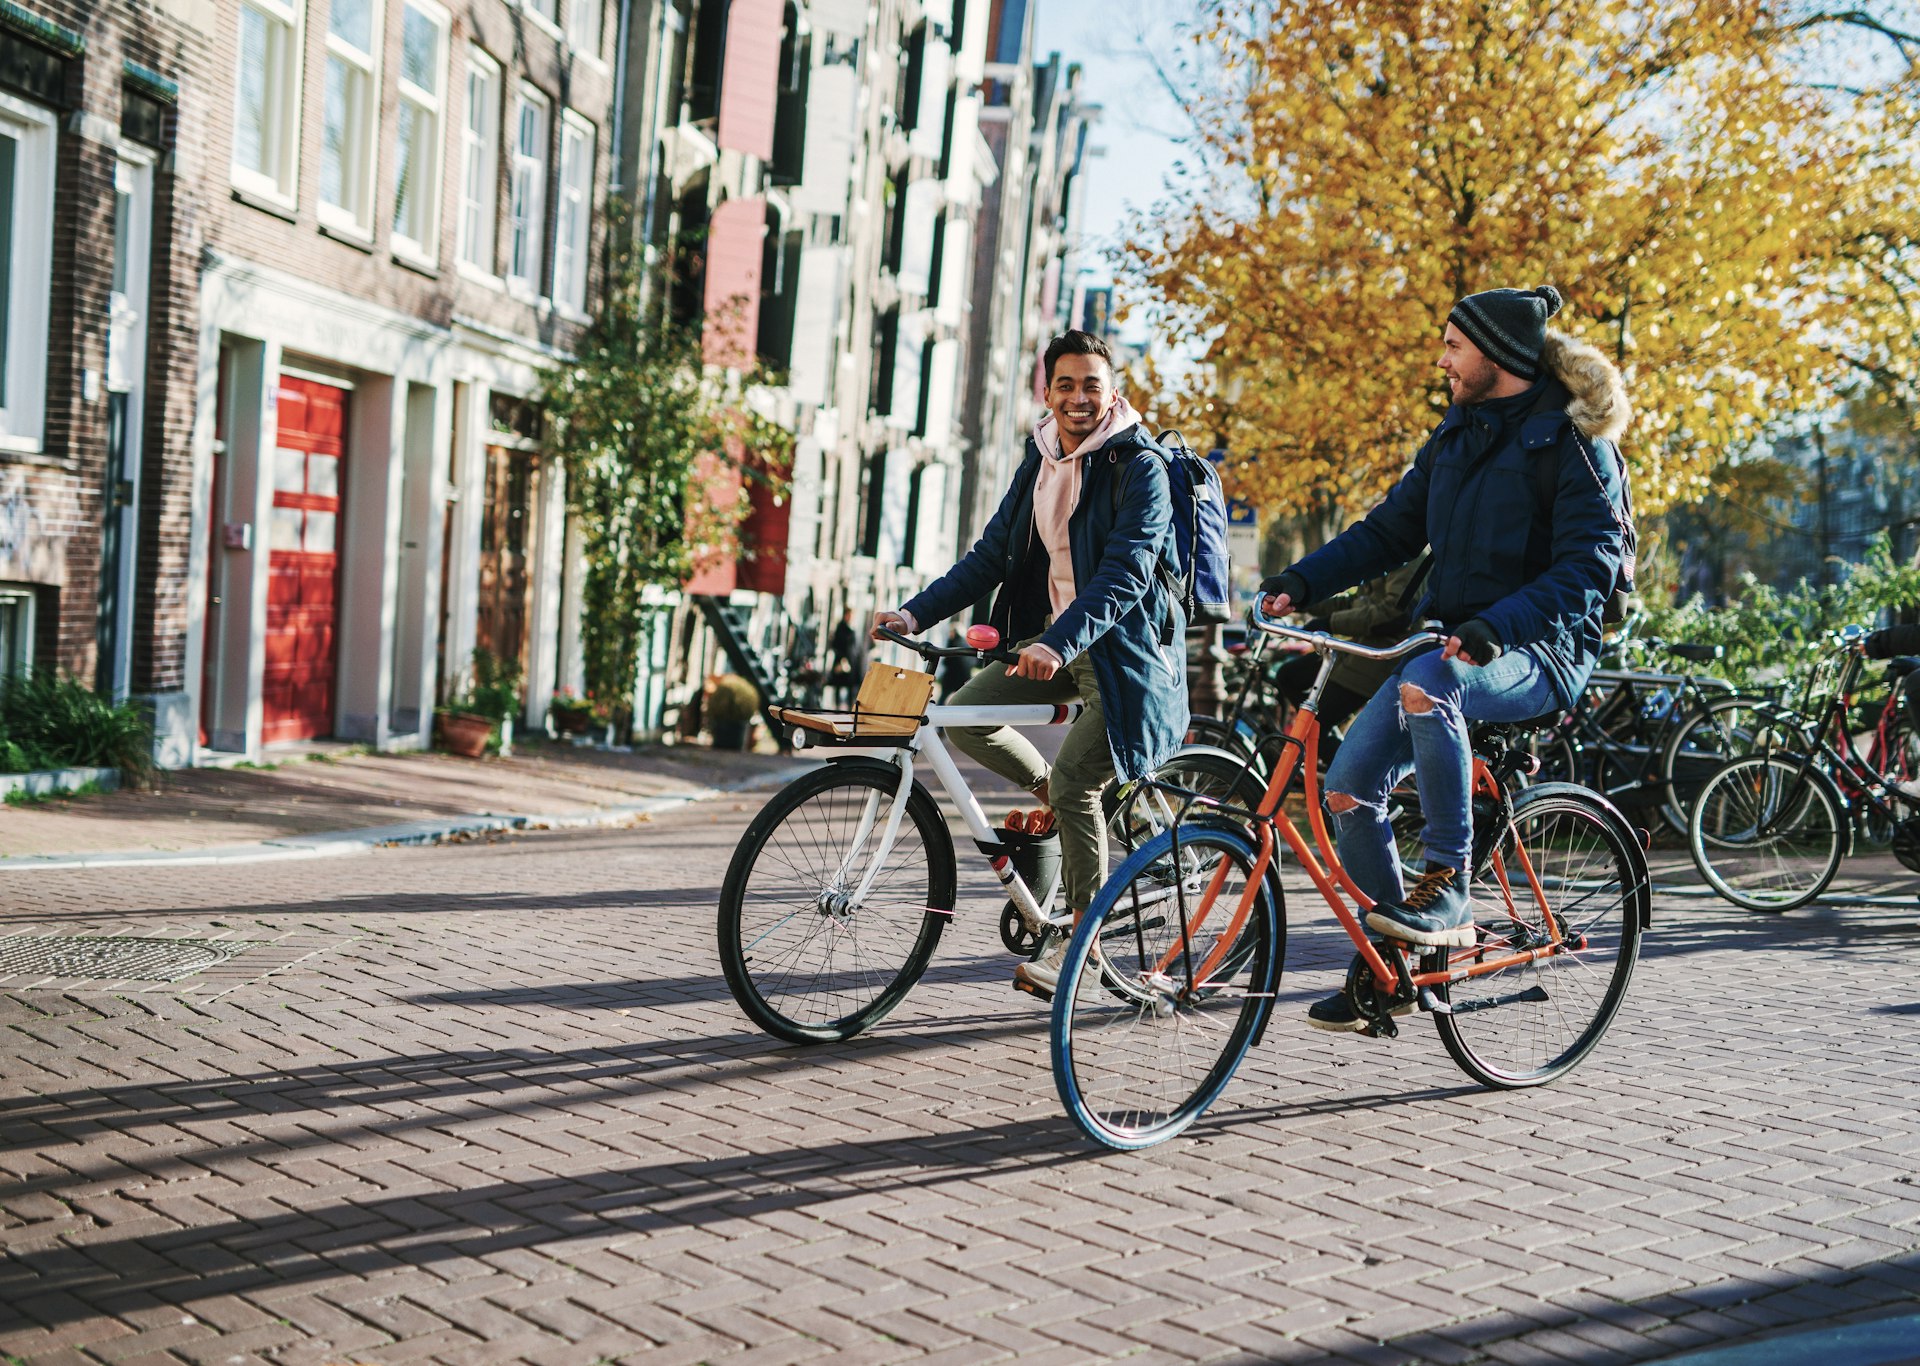 Two cyclists exploring a street in central Amsterdam, the Netherlands